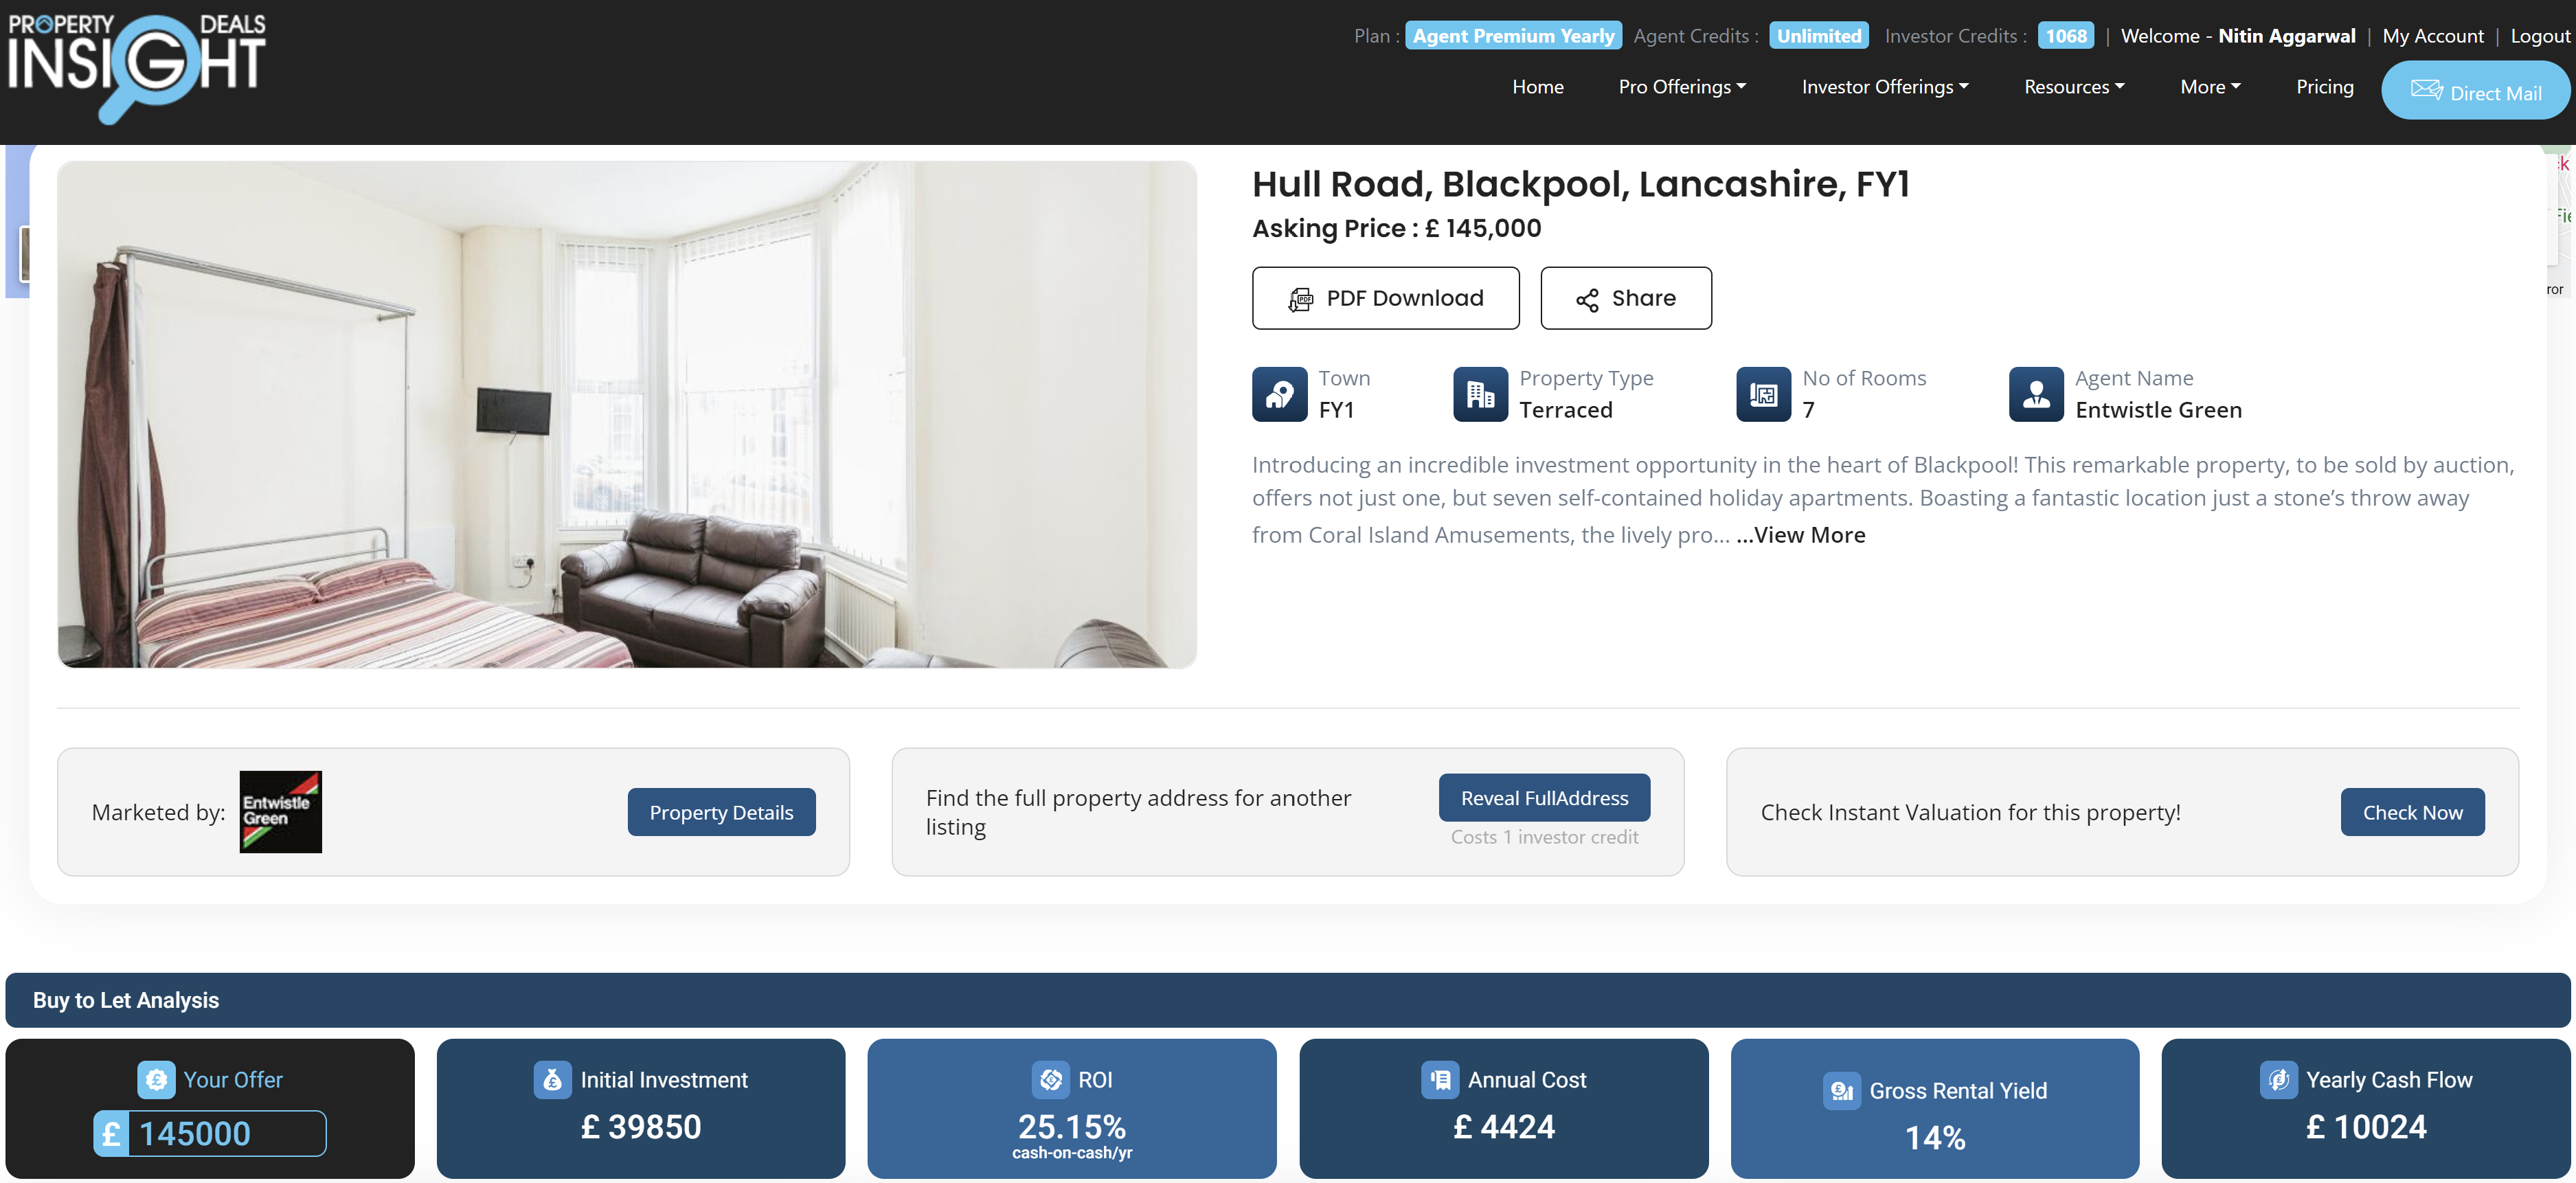 Deal Analysis - Powered by Property Deals Insight